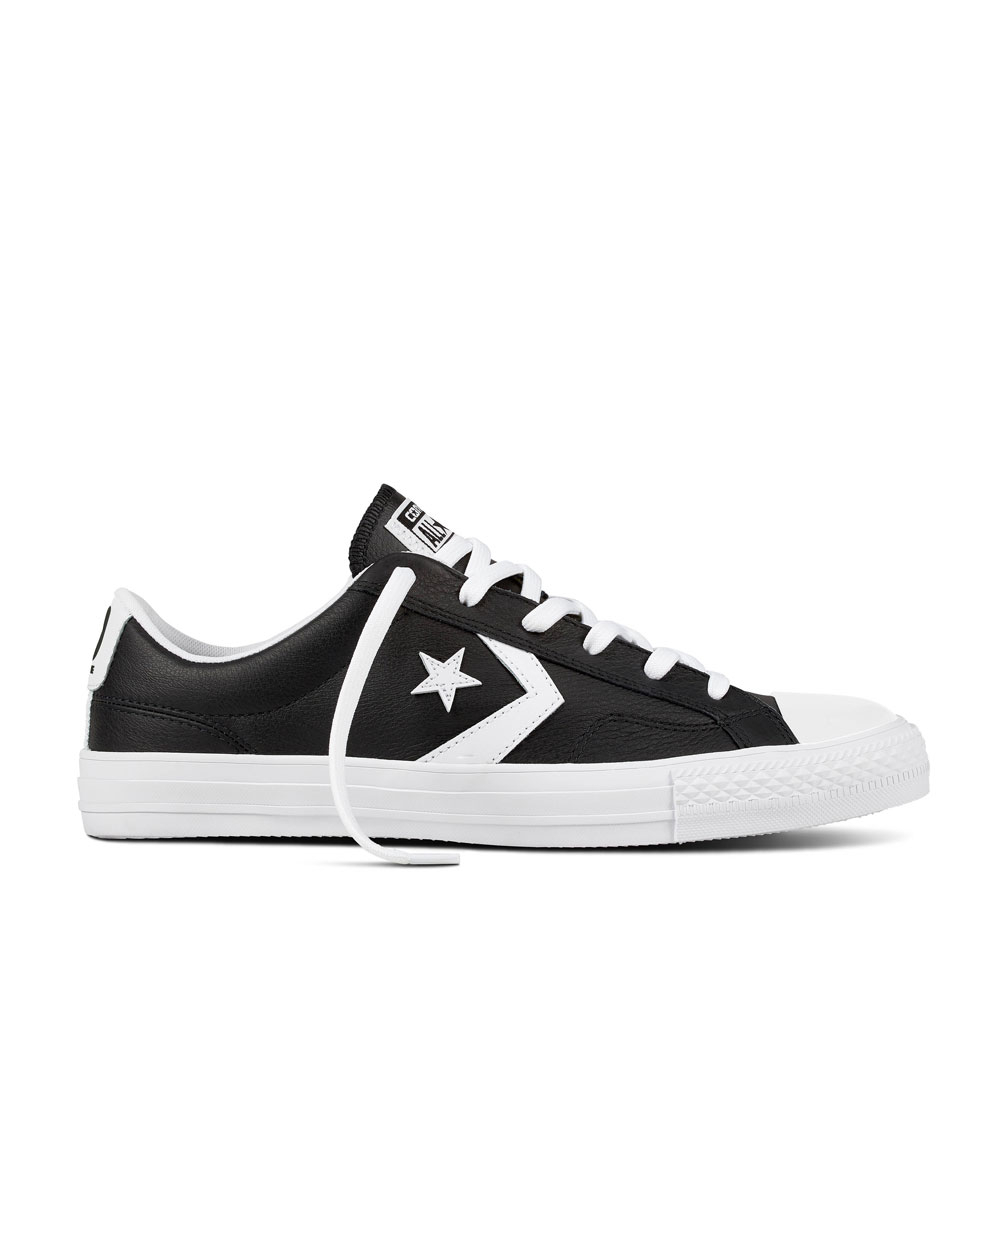 Converse Star Player Ox Leather (black/white)